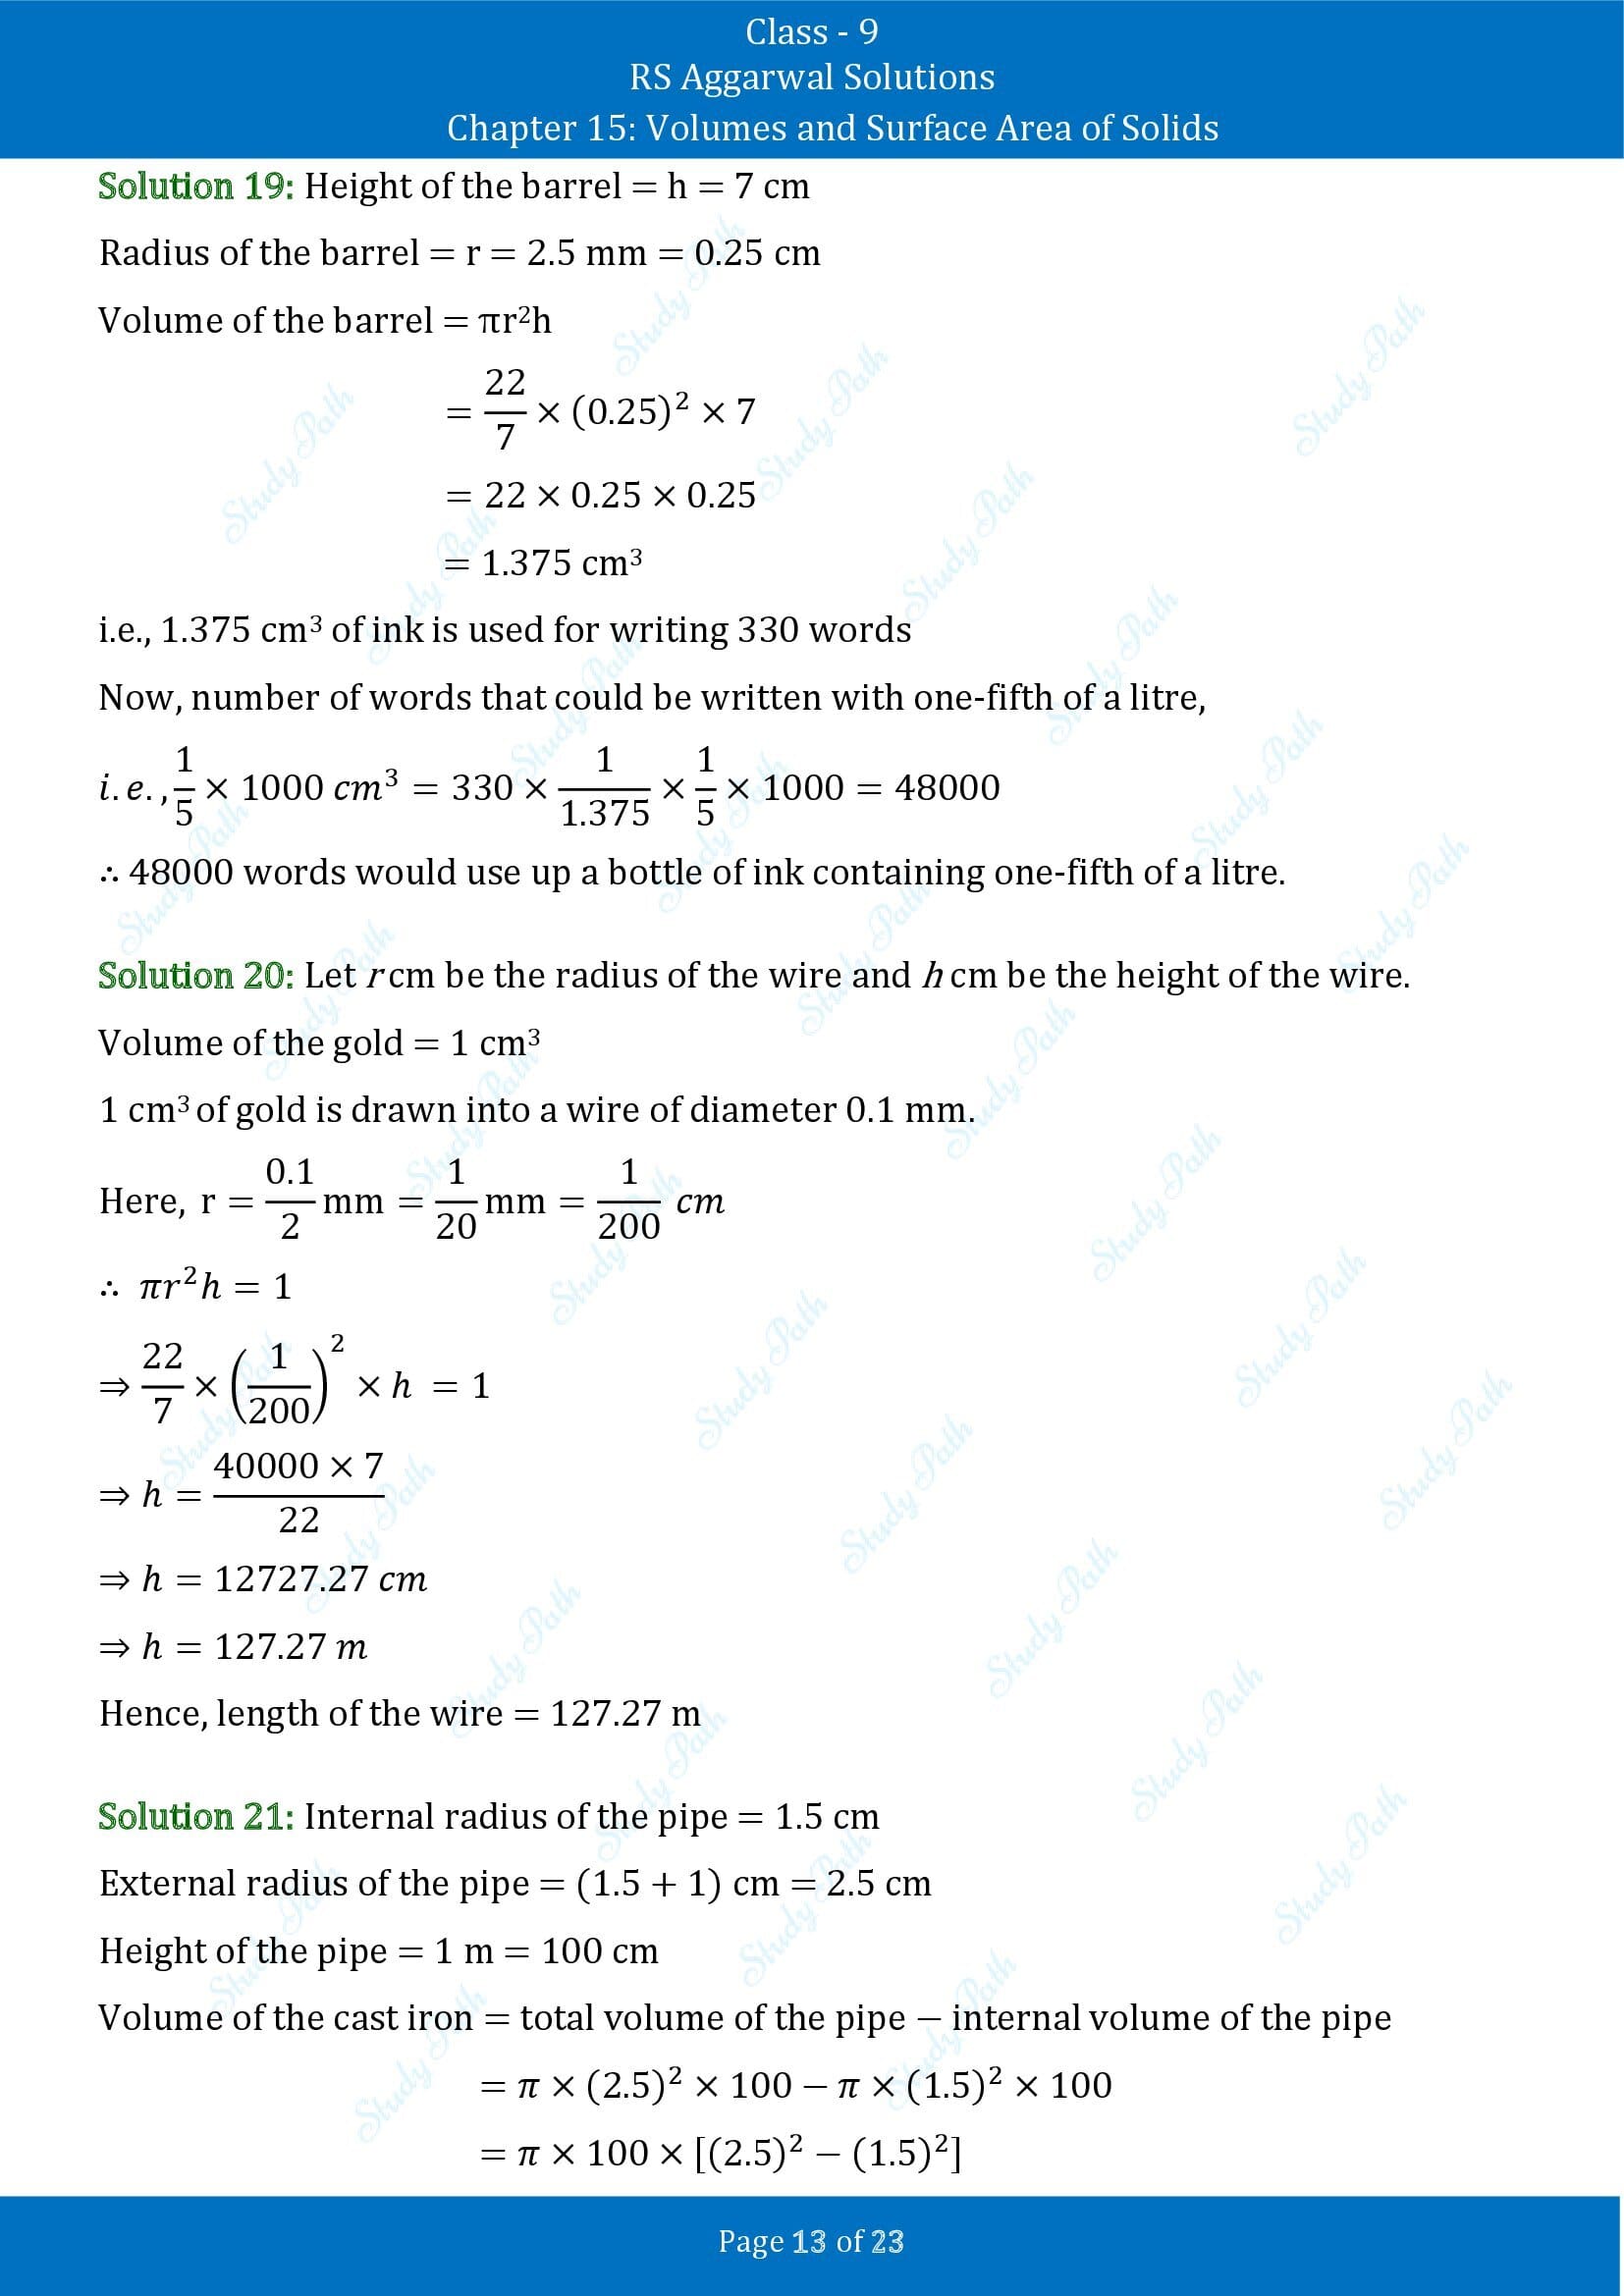 RS Aggarwal Solutions Class 9 Chapter 15 Volumes and Surface Area of Solids Exercise 15B 00013